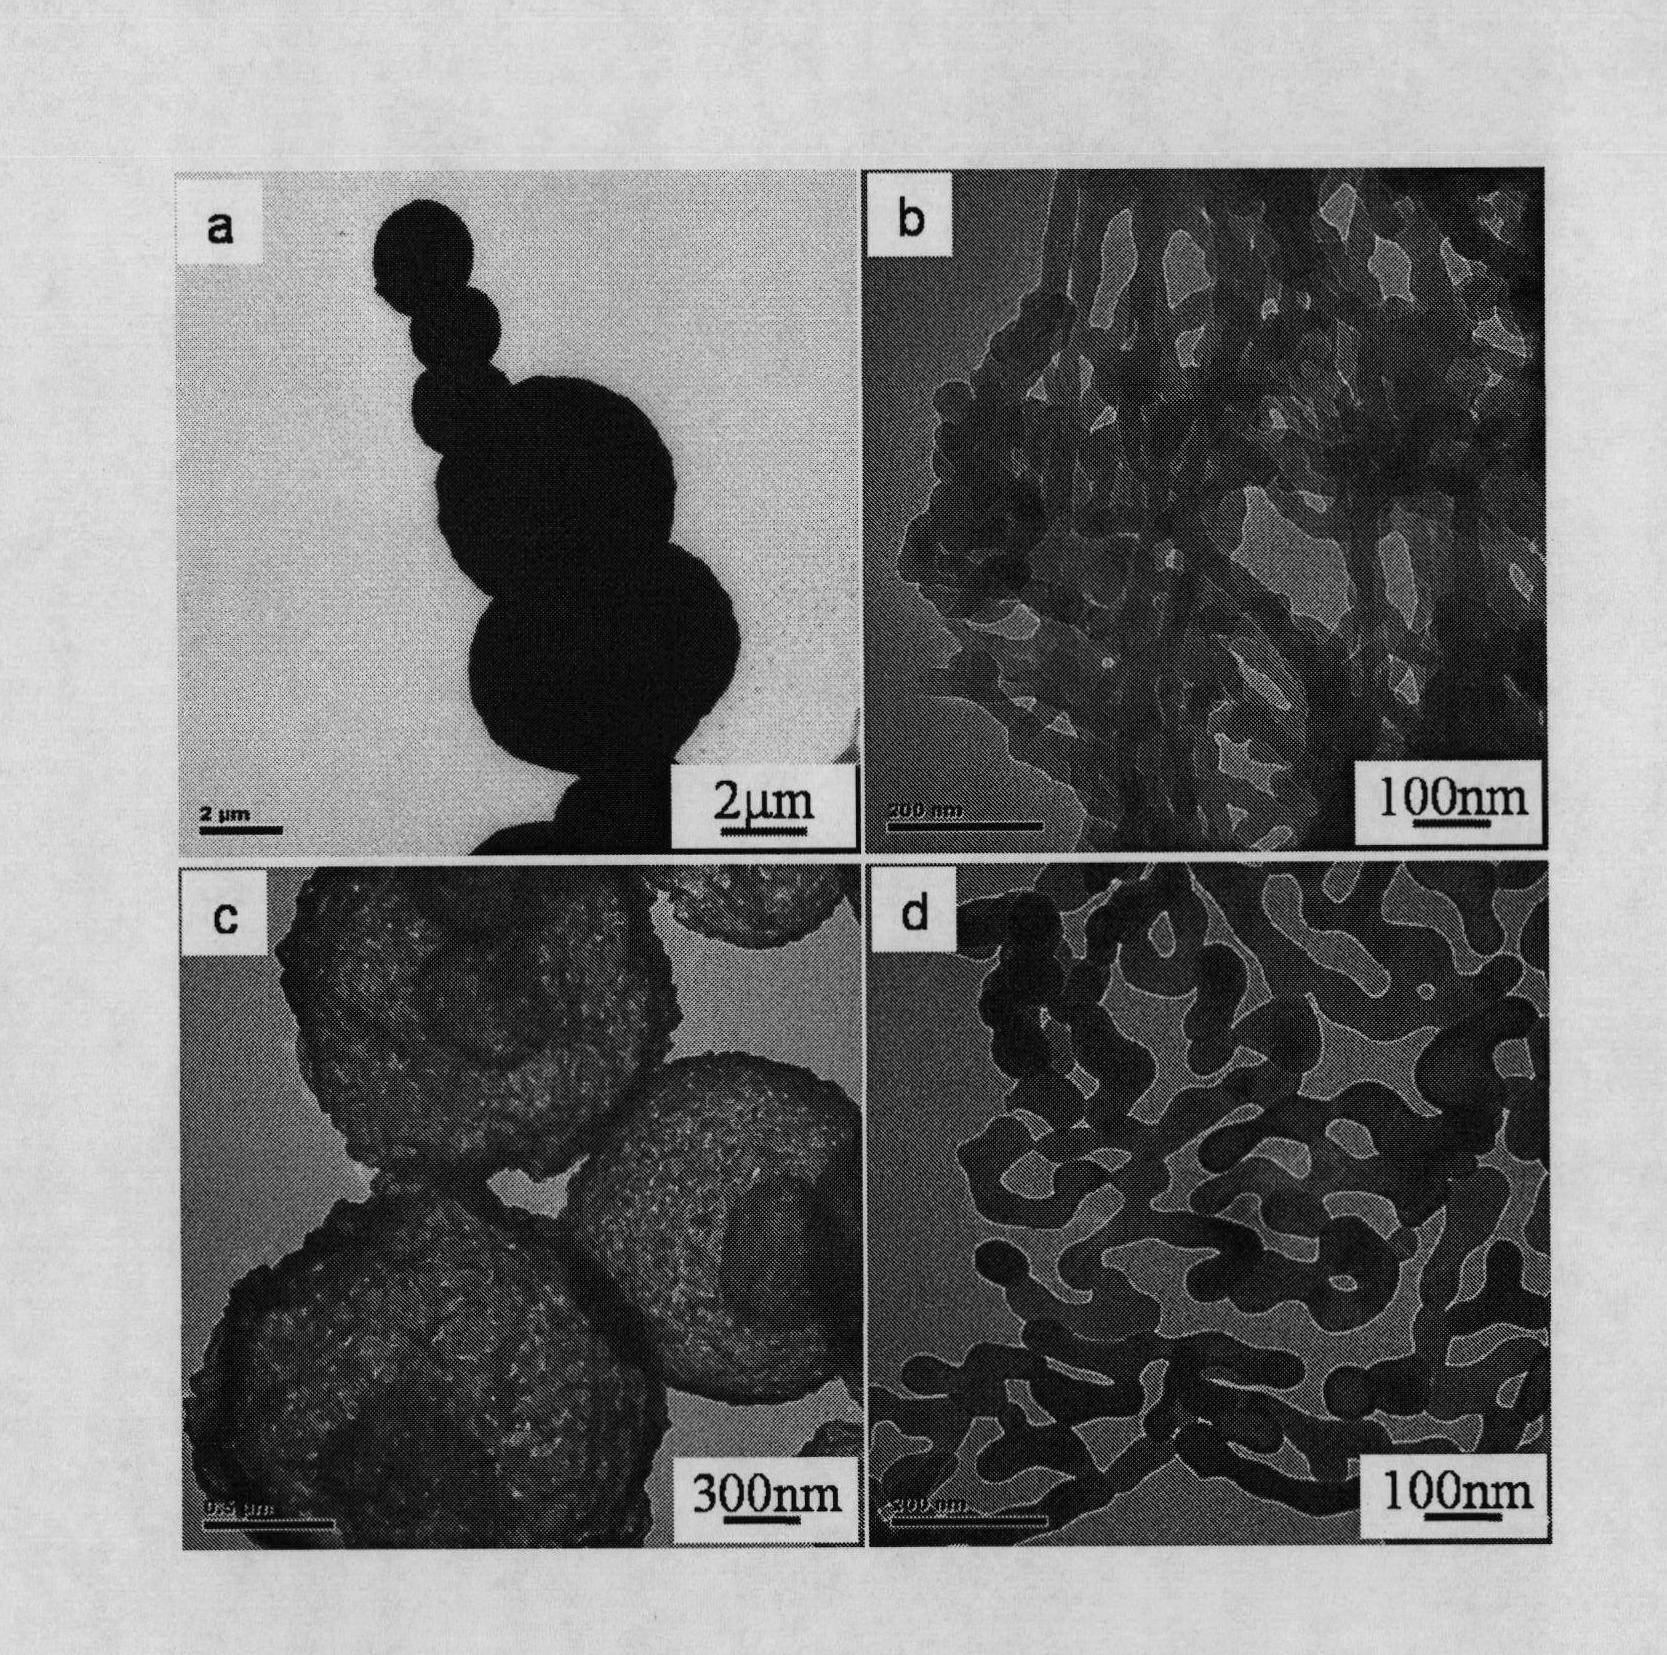 Method for preparing nano iron/carbon compound material by kitchen waste